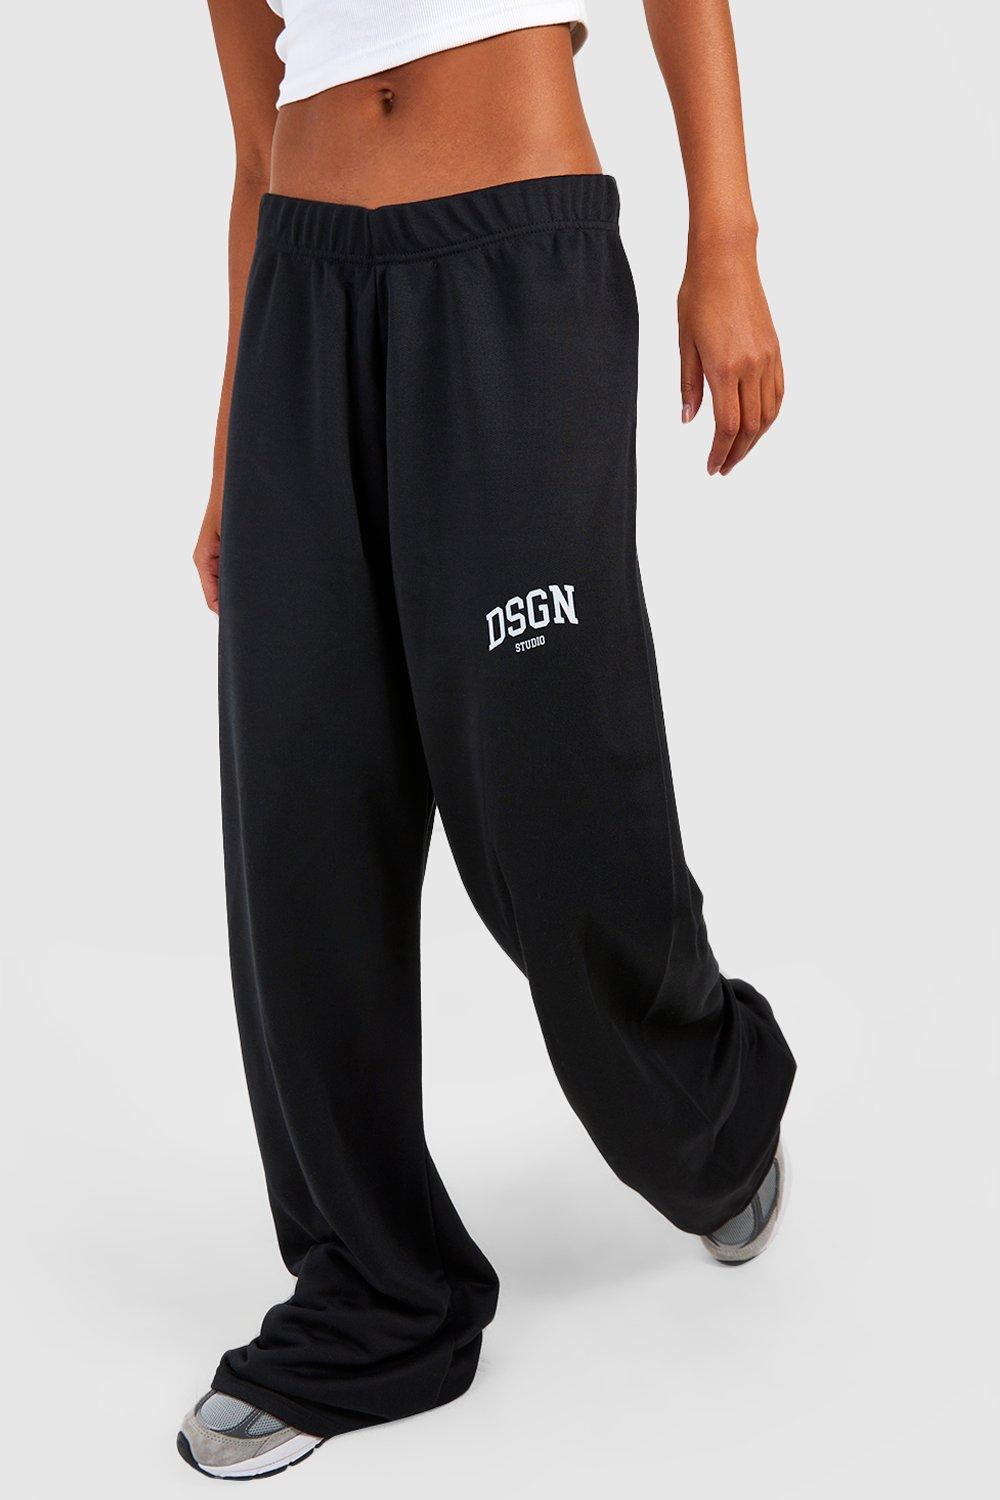 Everlast Womens Womens Comfy Wide Leg Sweatpants for Running Yoga Gym  Workout : : Clothing, Shoes & Accessories